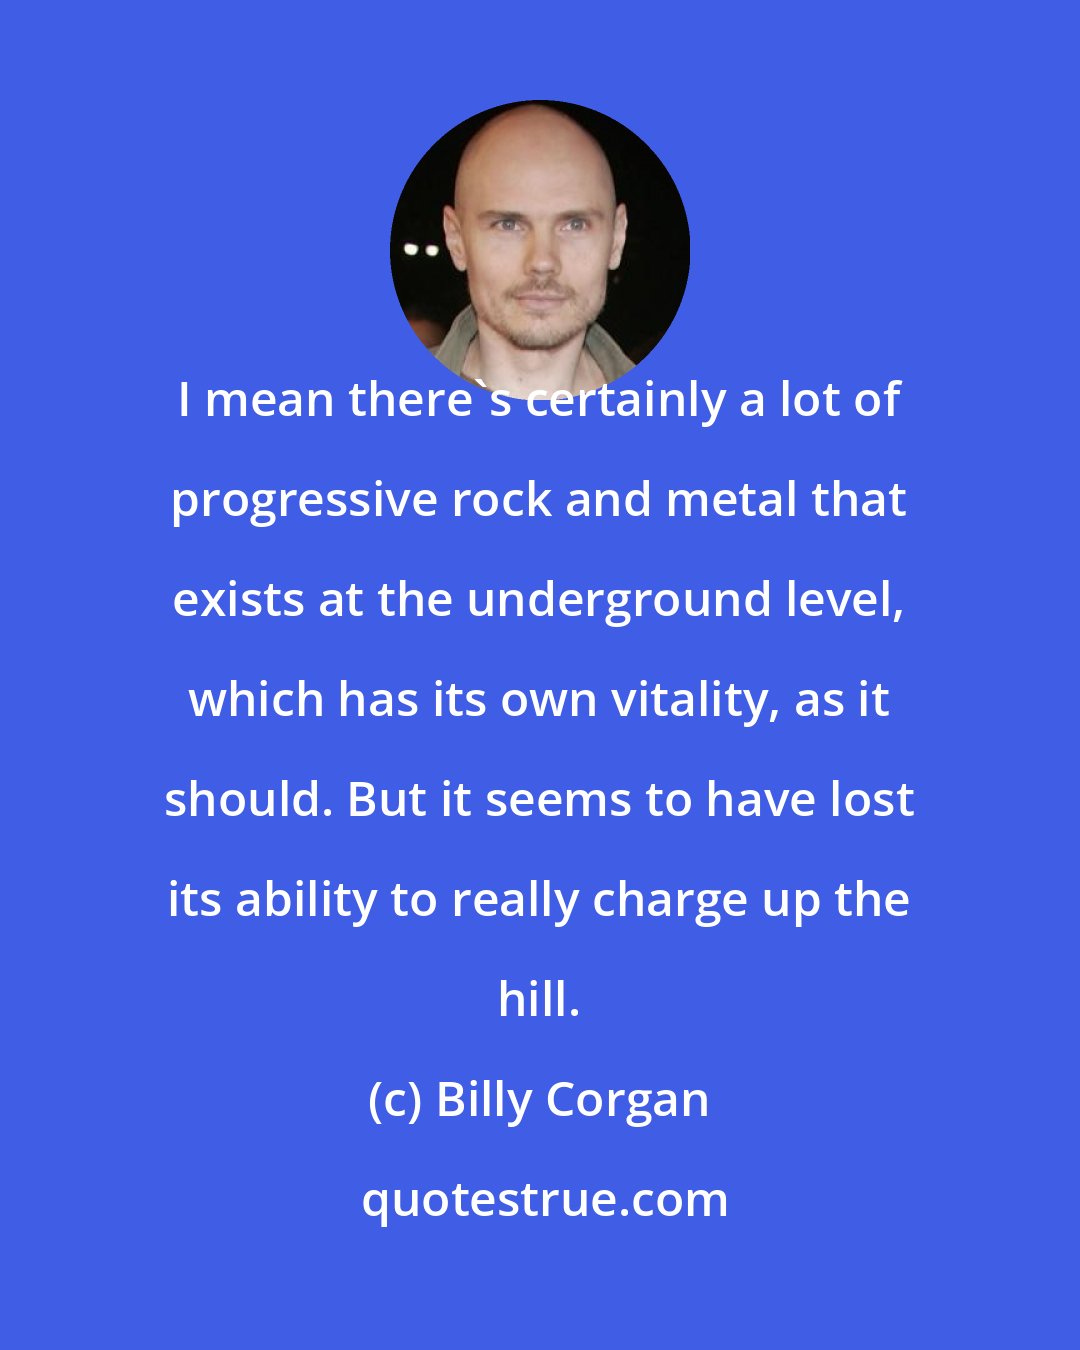 Billy Corgan: I mean there's certainly a lot of progressive rock and metal that exists at the underground level, which has its own vitality, as it should. But it seems to have lost its ability to really charge up the hill.